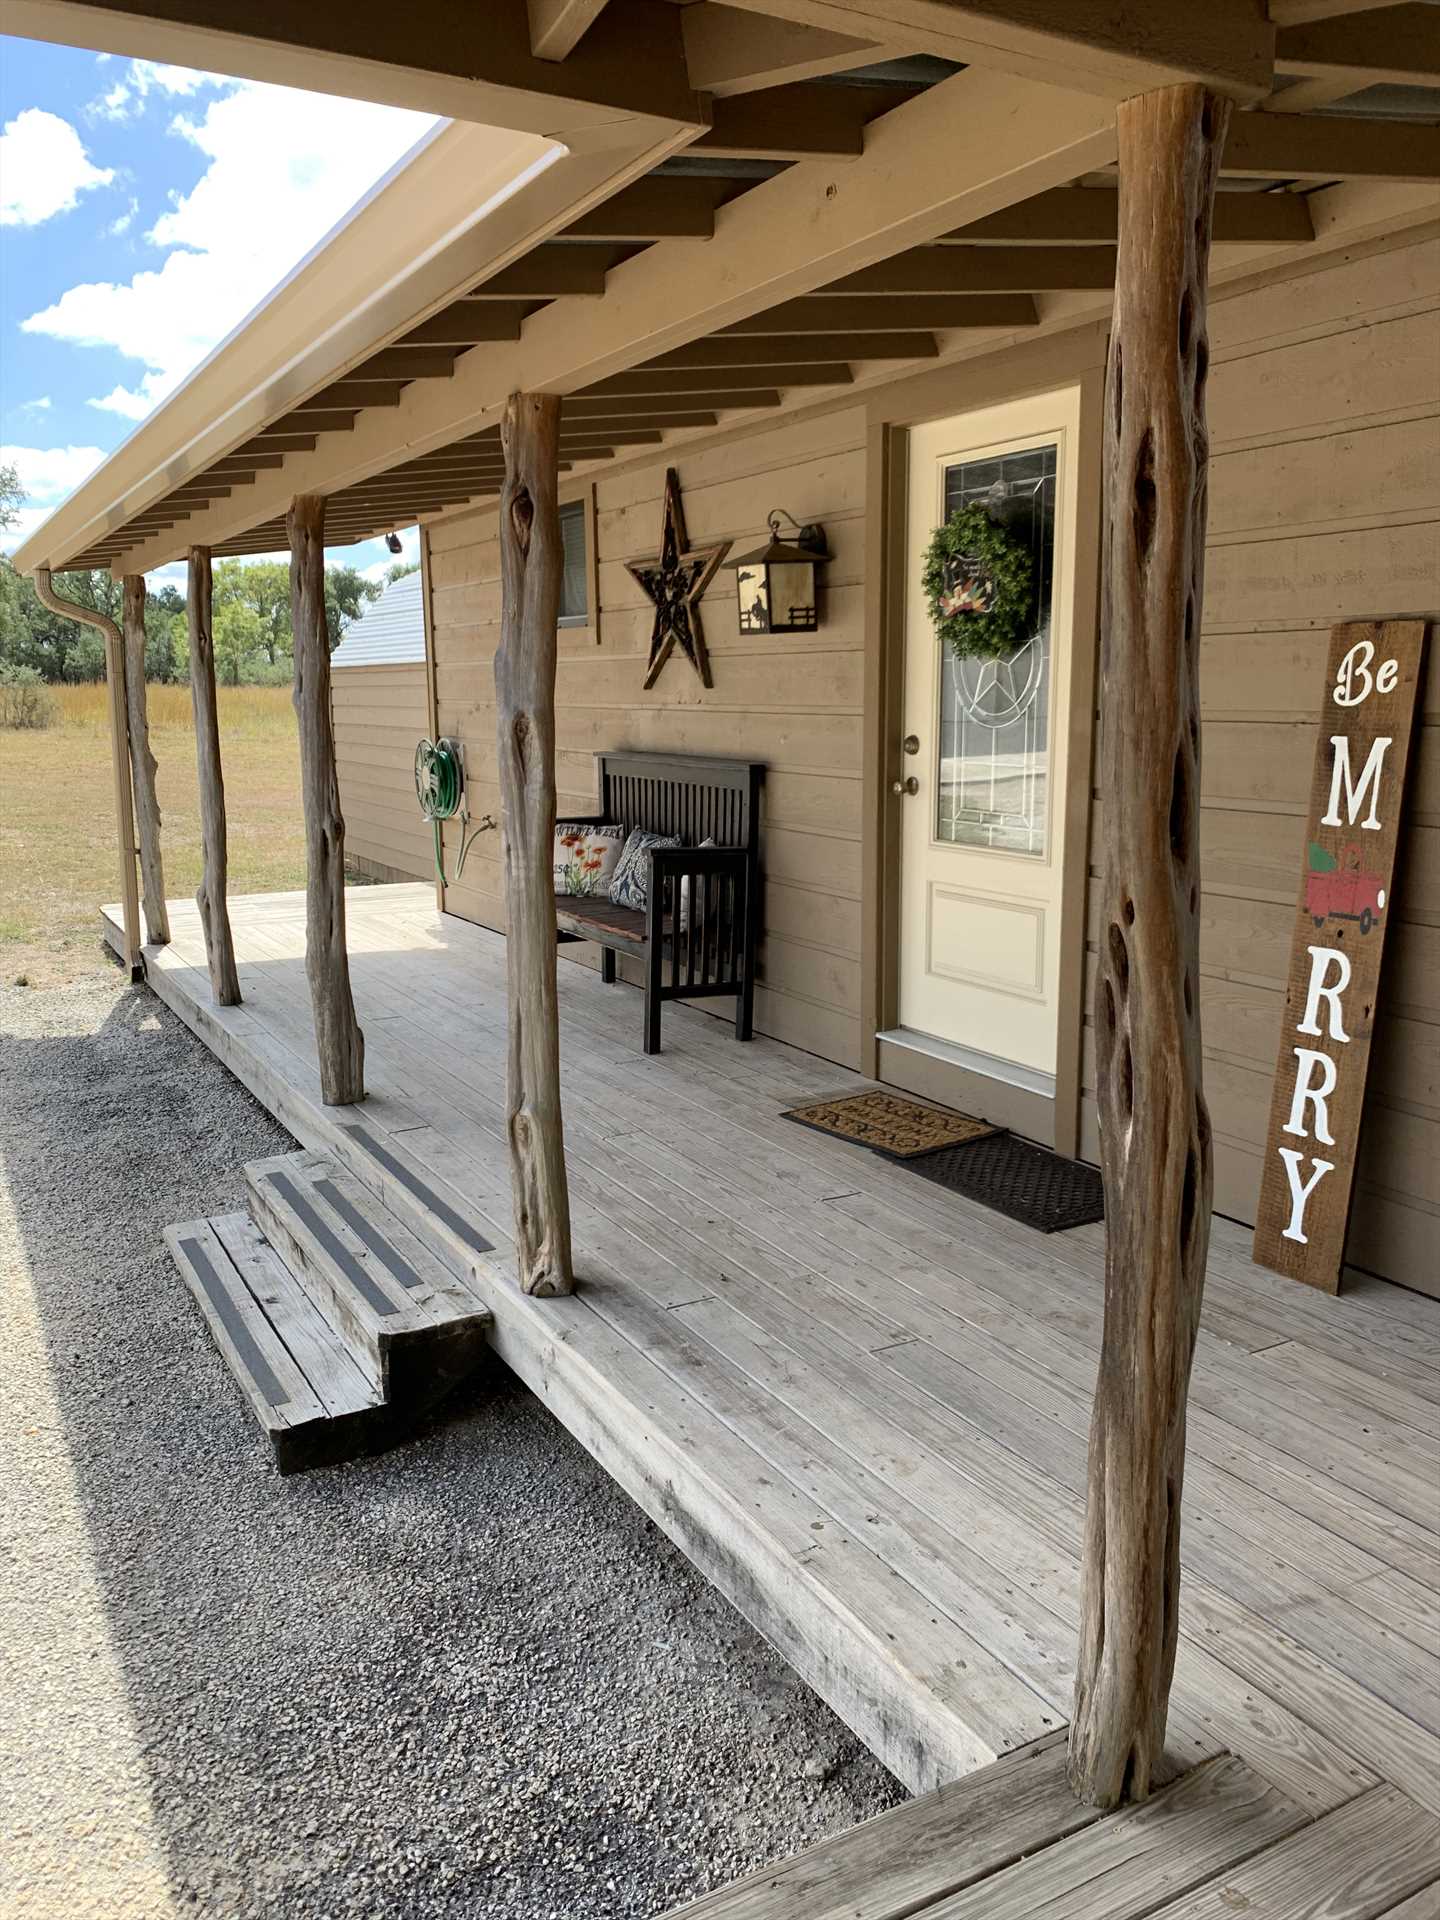                                                 The star by the door tells you you're in the right place...welcome to the Star Cabin, and the Hill Country!